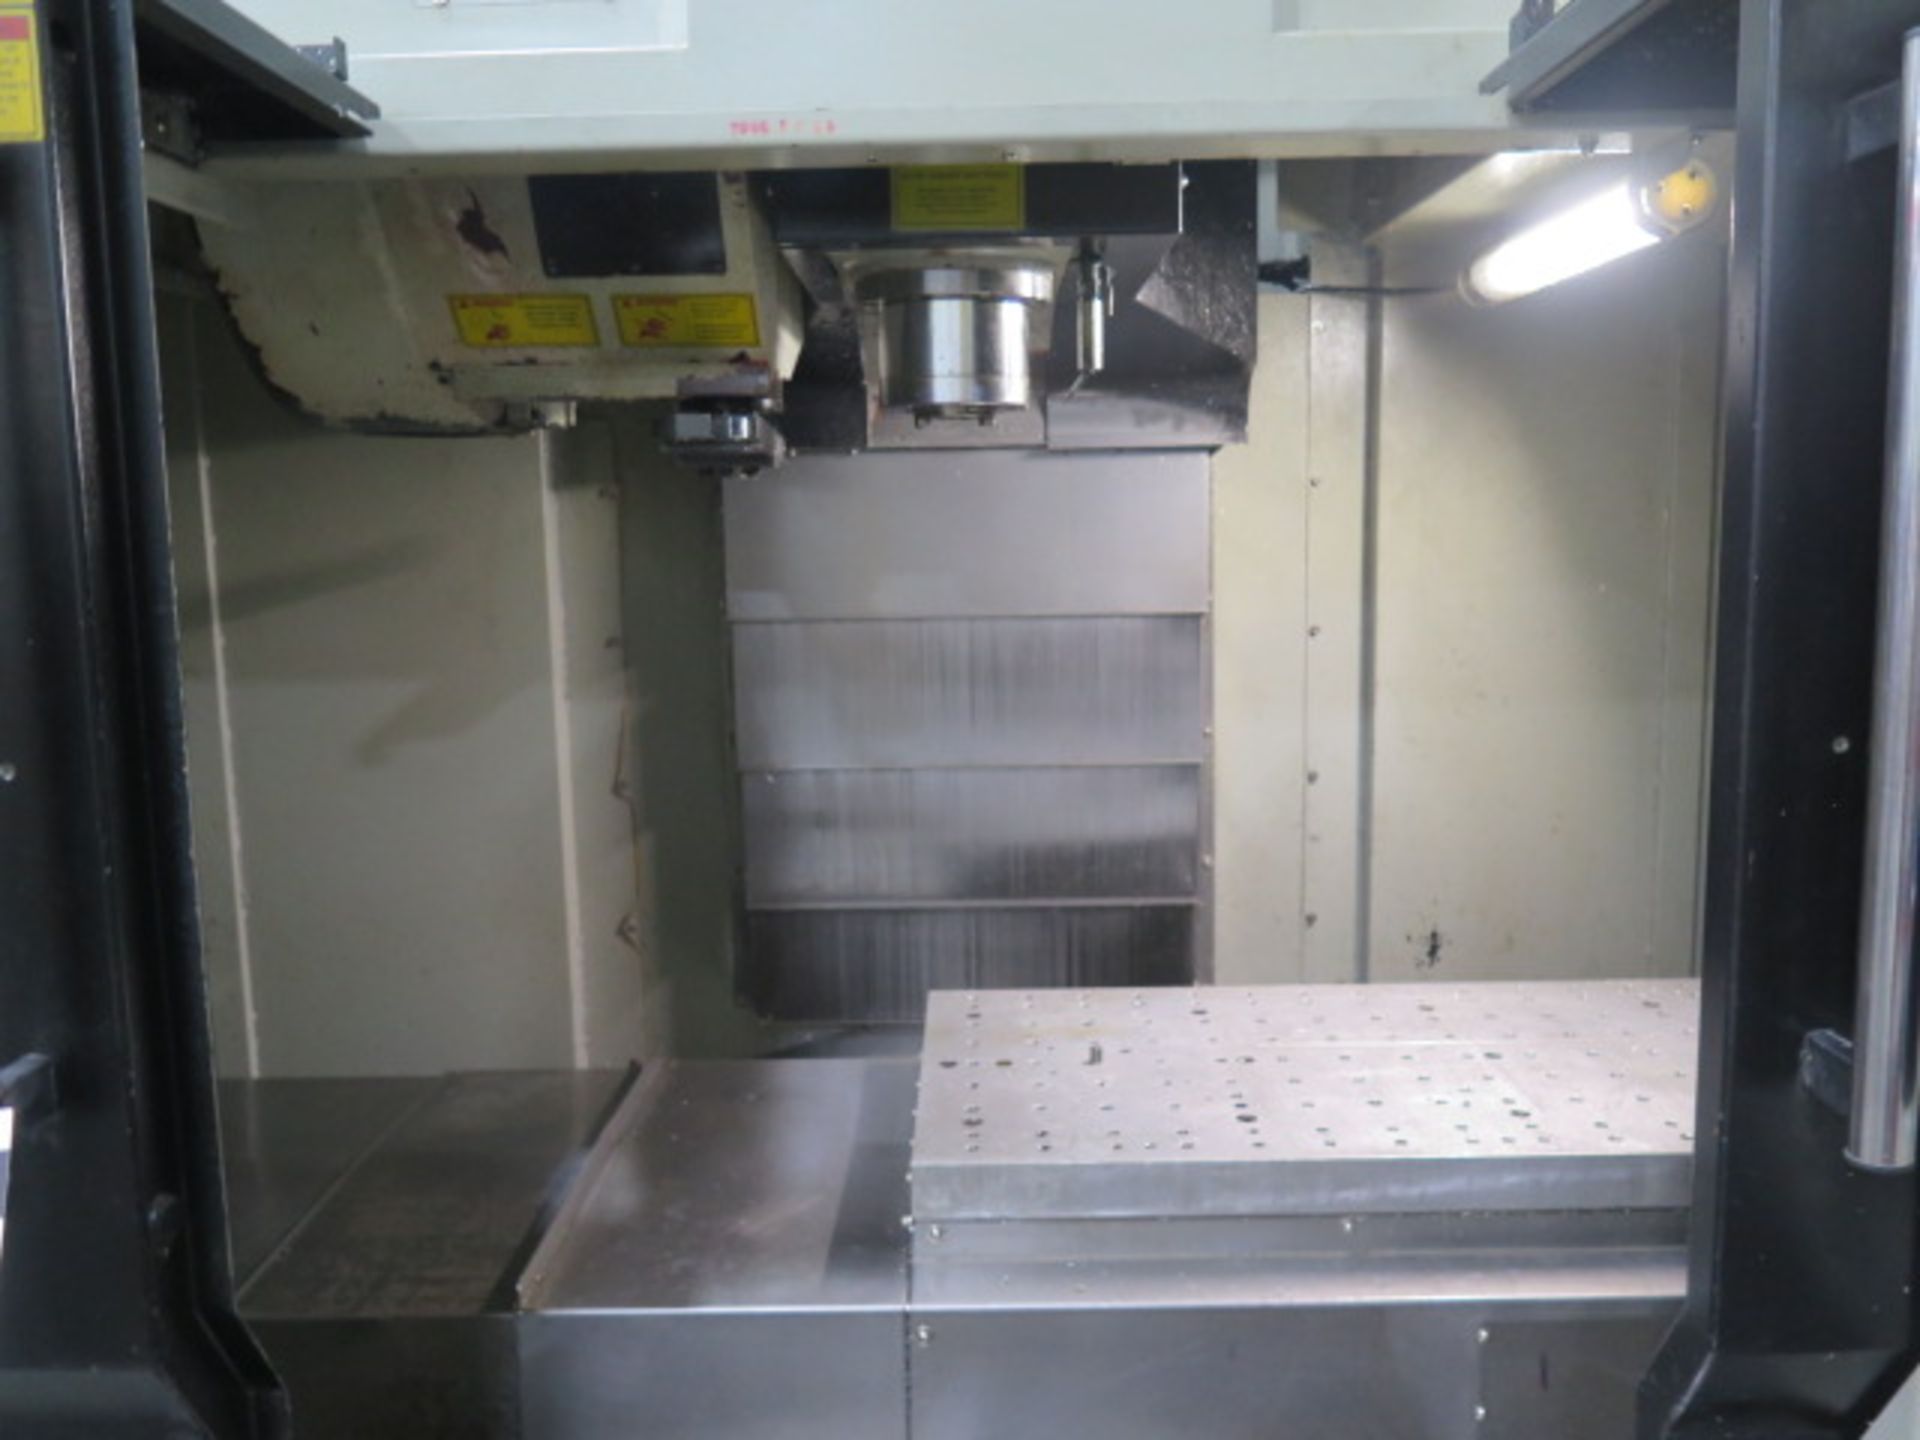 Amera Seiki A-3 CNC Vertical Machining Center w/ Fanuc Series 21i-MB Controls, SOLD AS IS - Image 4 of 16